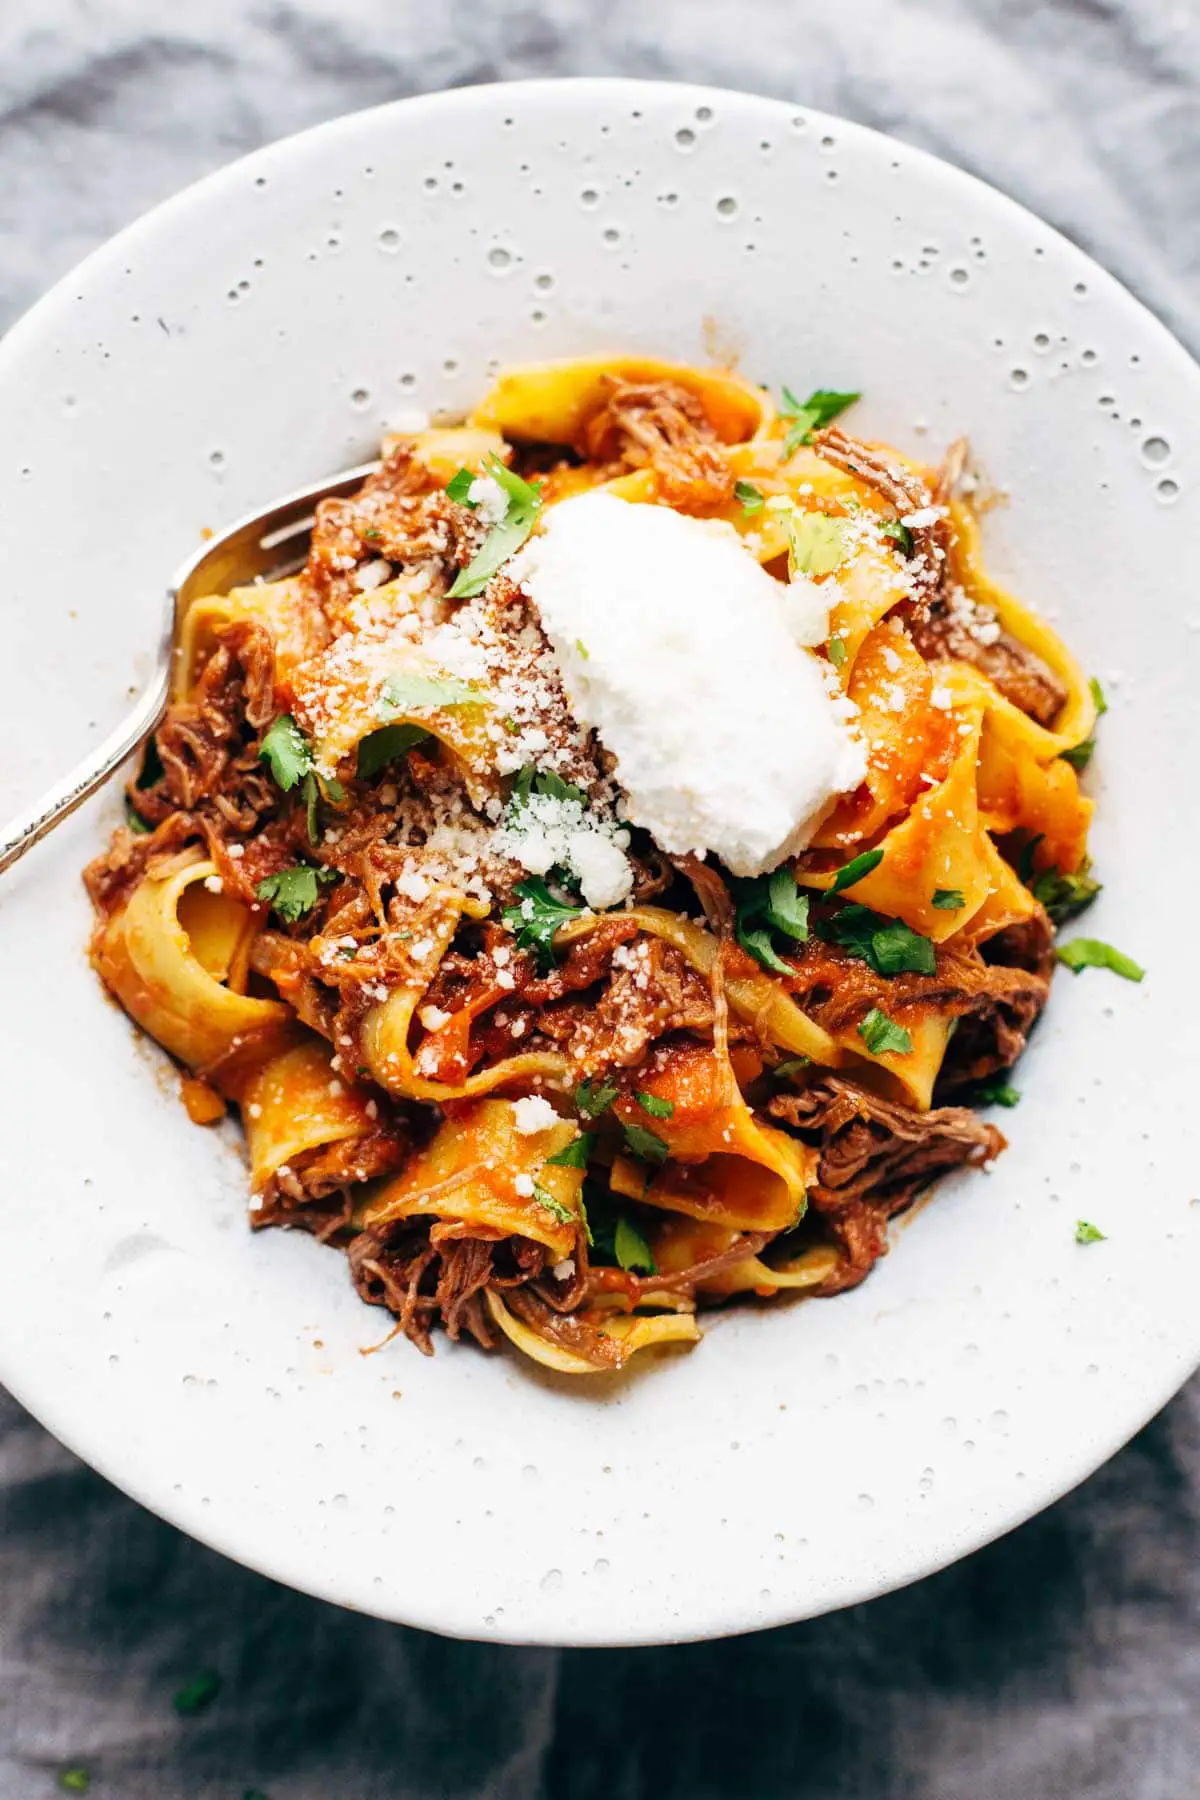 20+ Best Dinner Party Food Ideas - Easy Dinner Party Recipes, Slow-Cooker Beef Ragu With Pappardelle